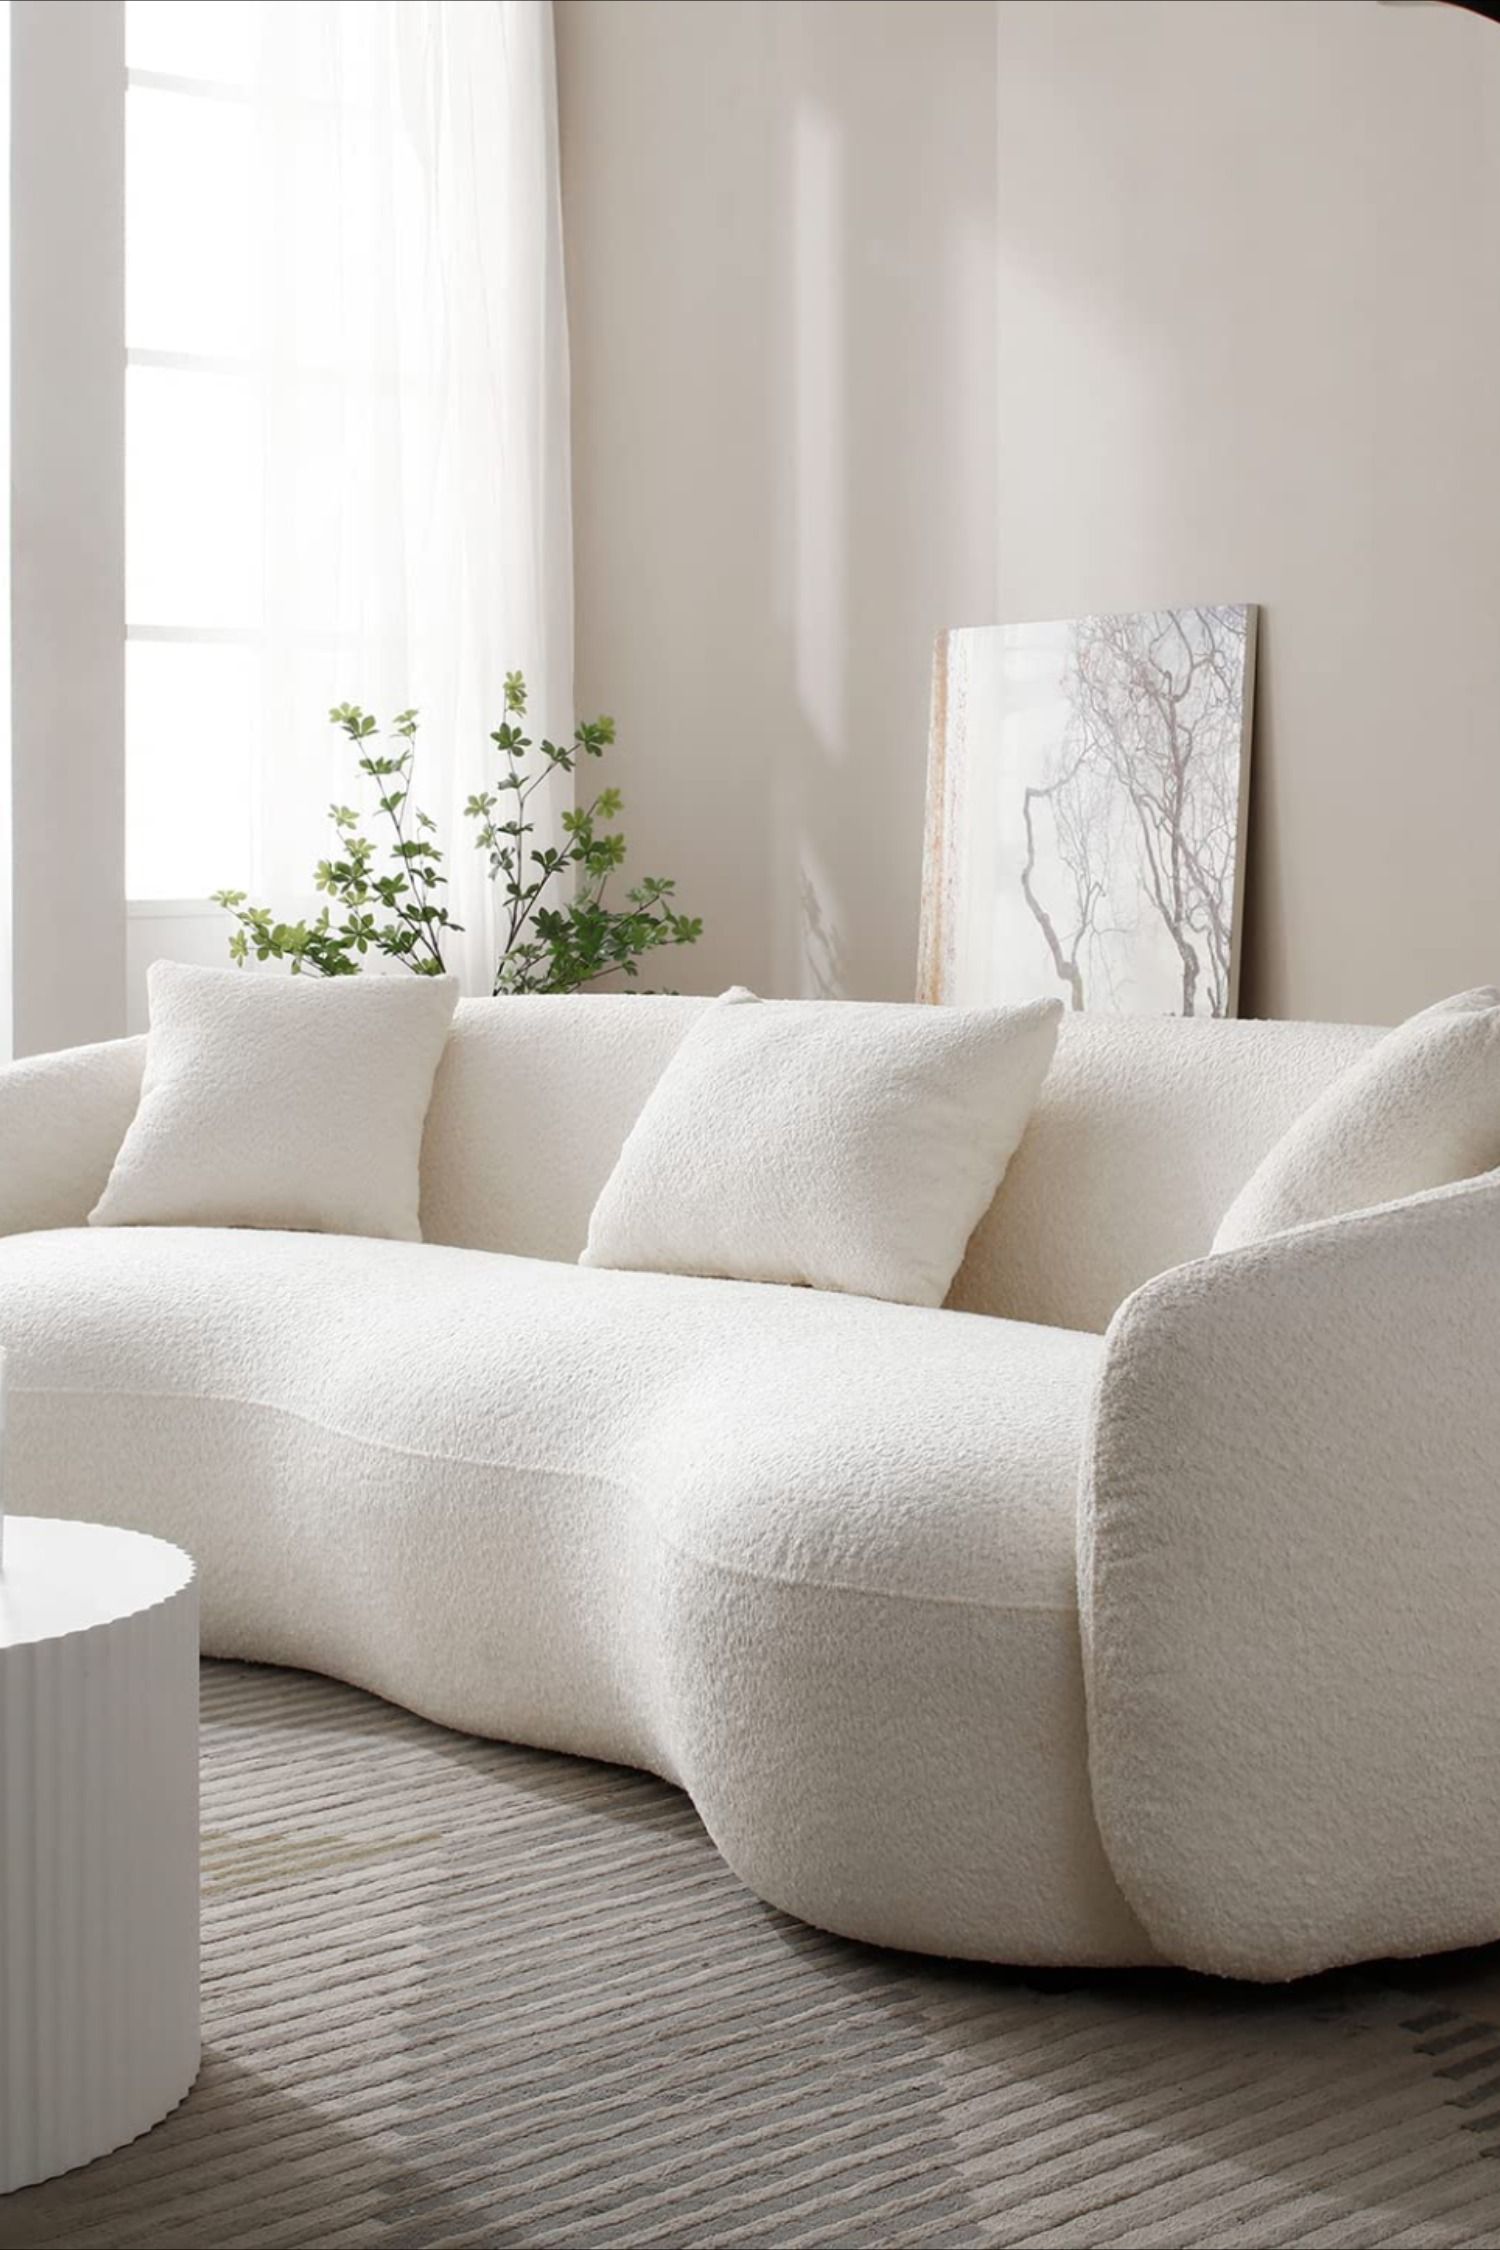 How to decide to select the sofa from
  online stores